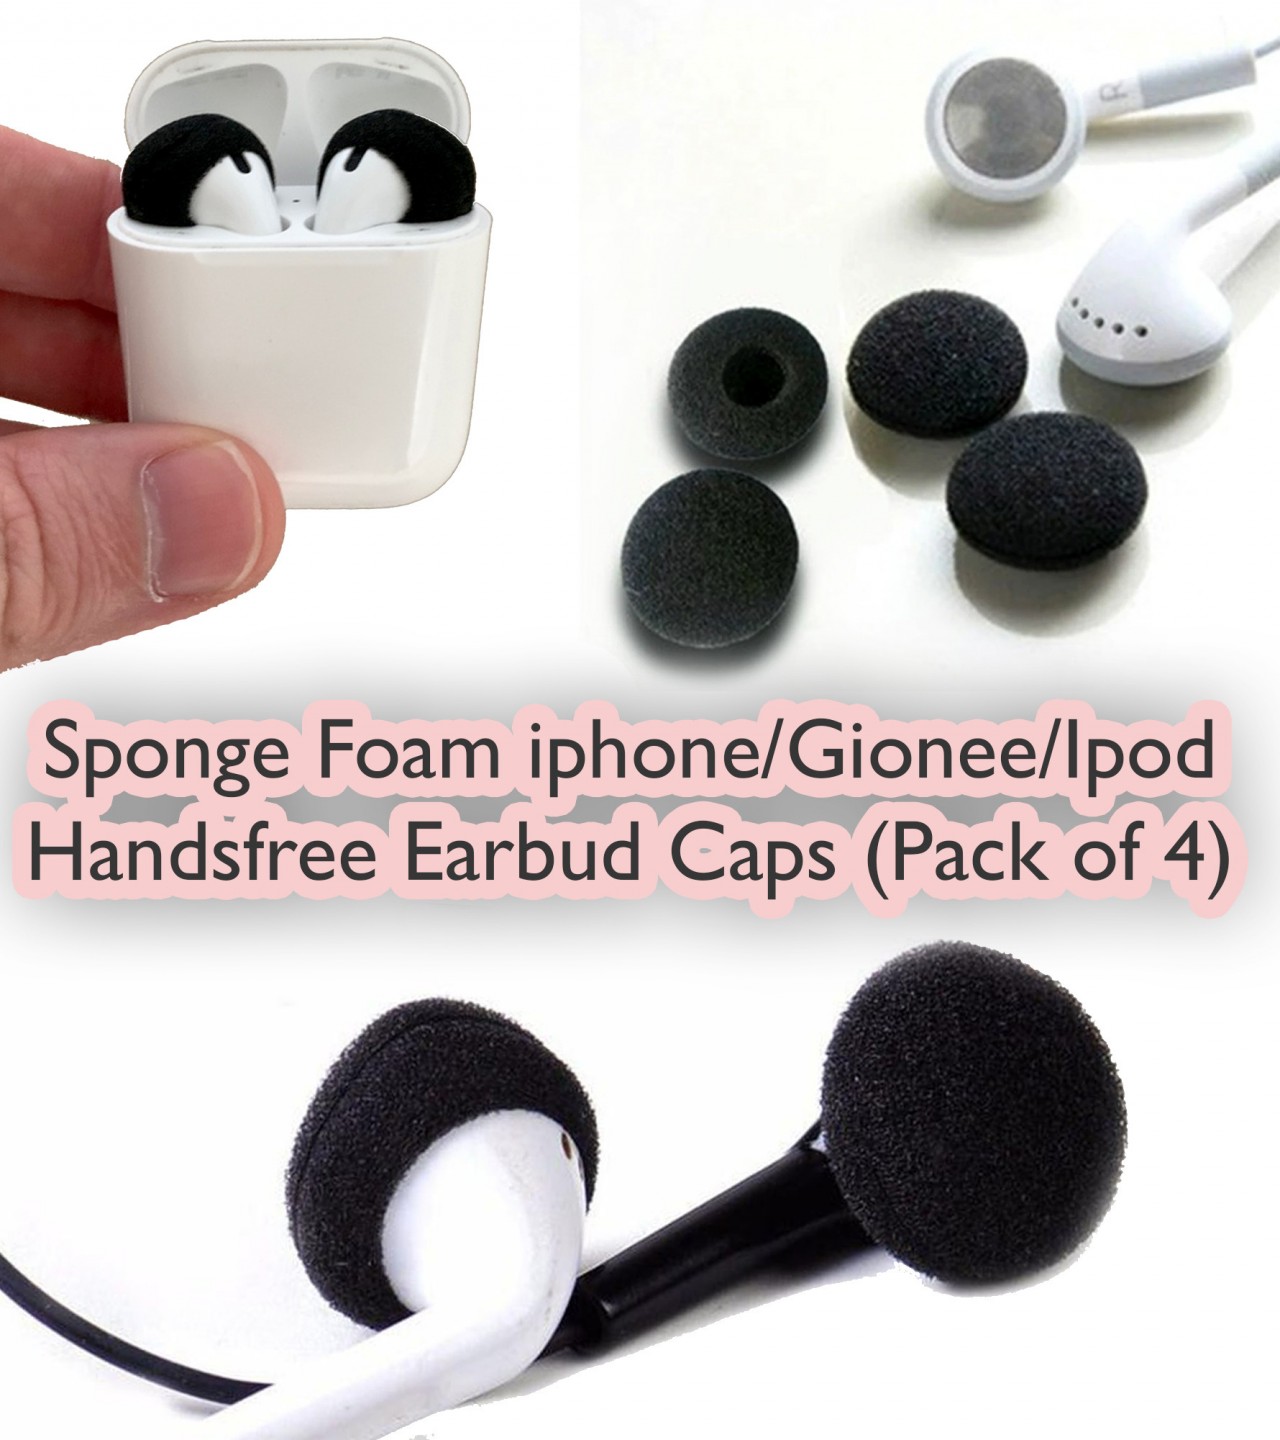 iPhone/Gionee/IPod Handsfree Ear Bud Caps - 3 Different Colours - Pack of 4